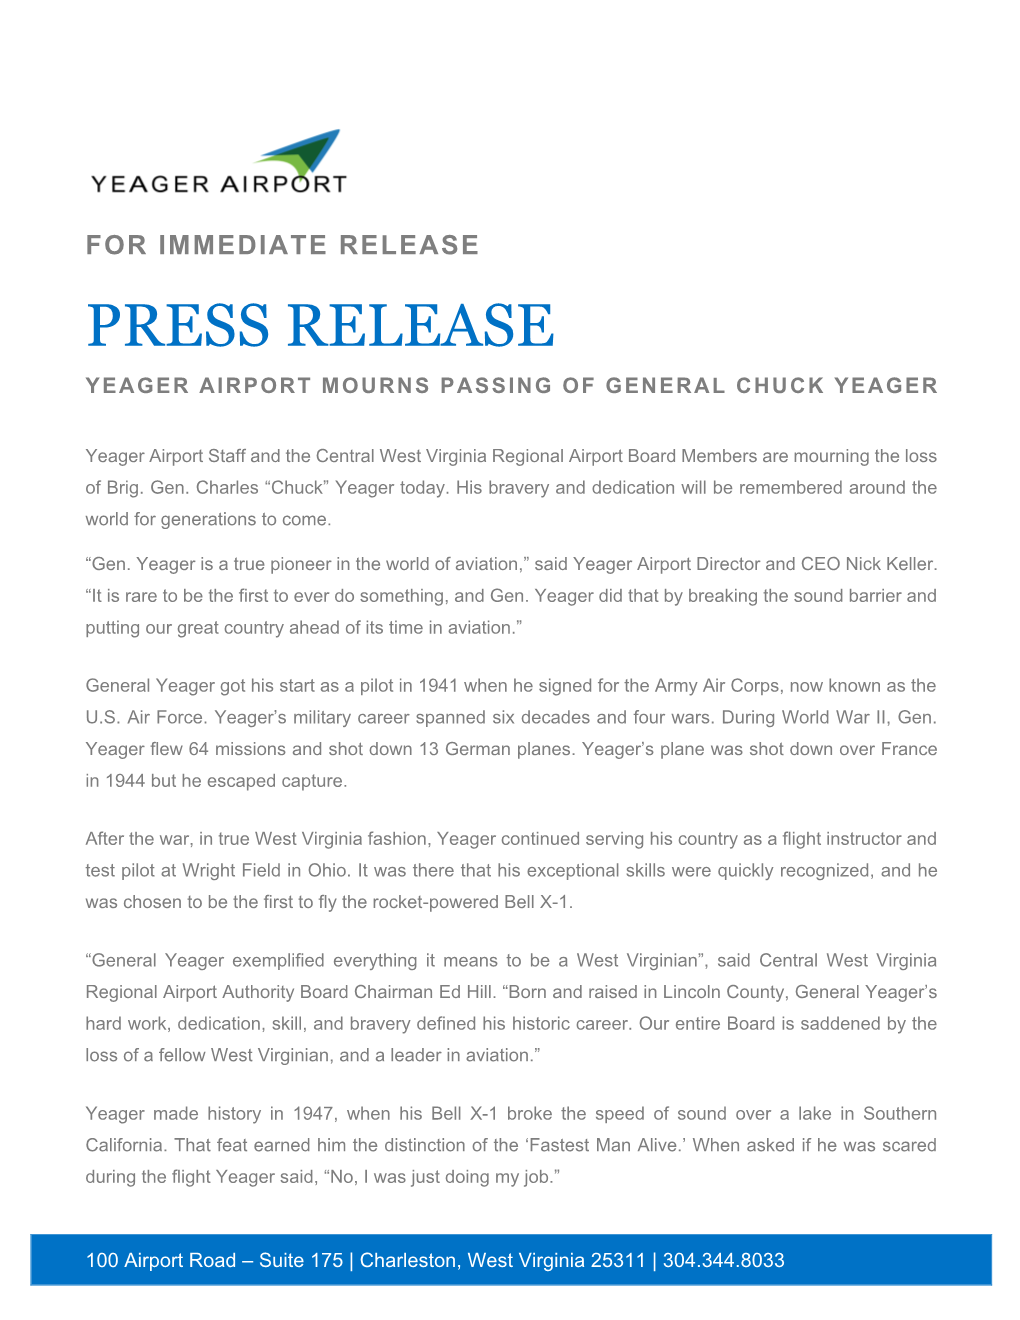 PRESS RELEASE – Chuck Yeager